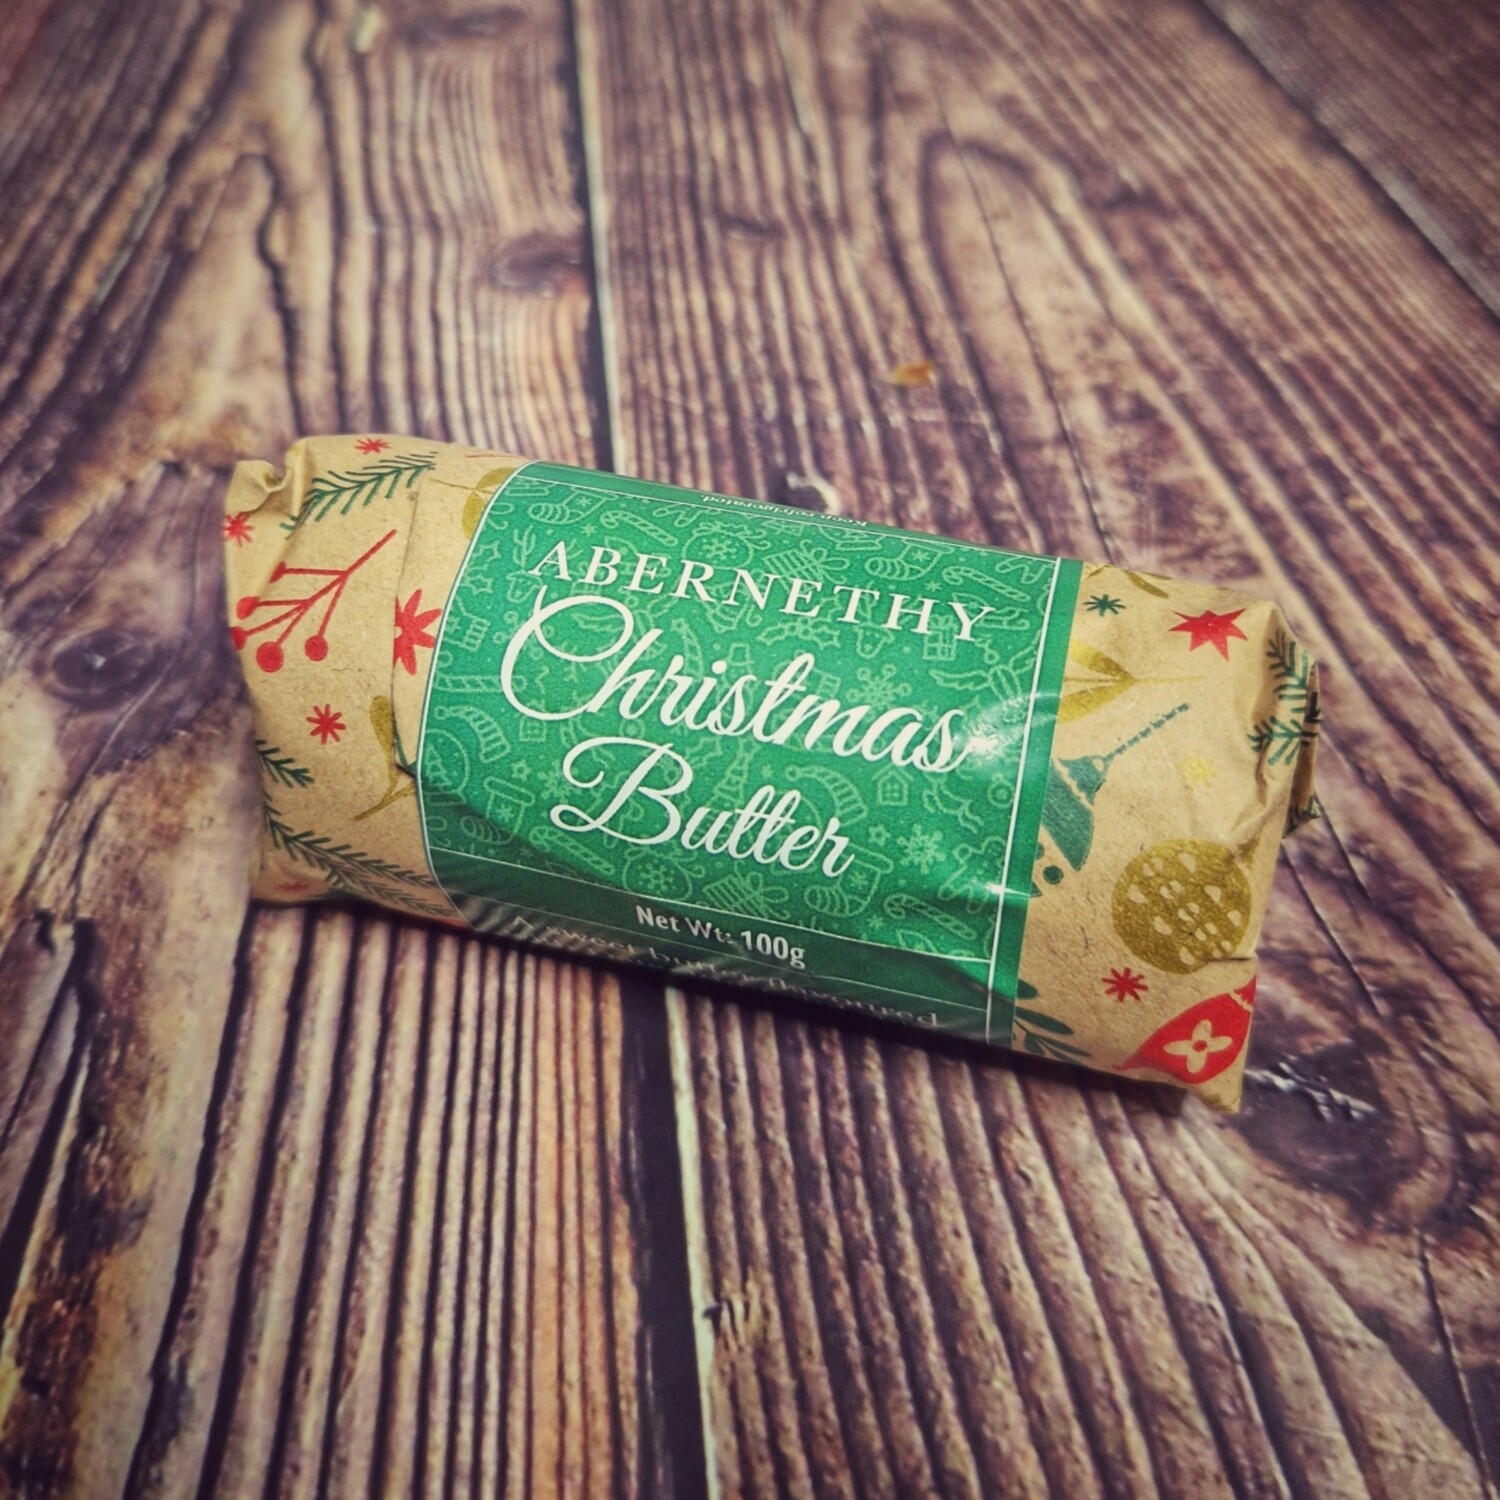 Abernethy Christmas Spiced Butter